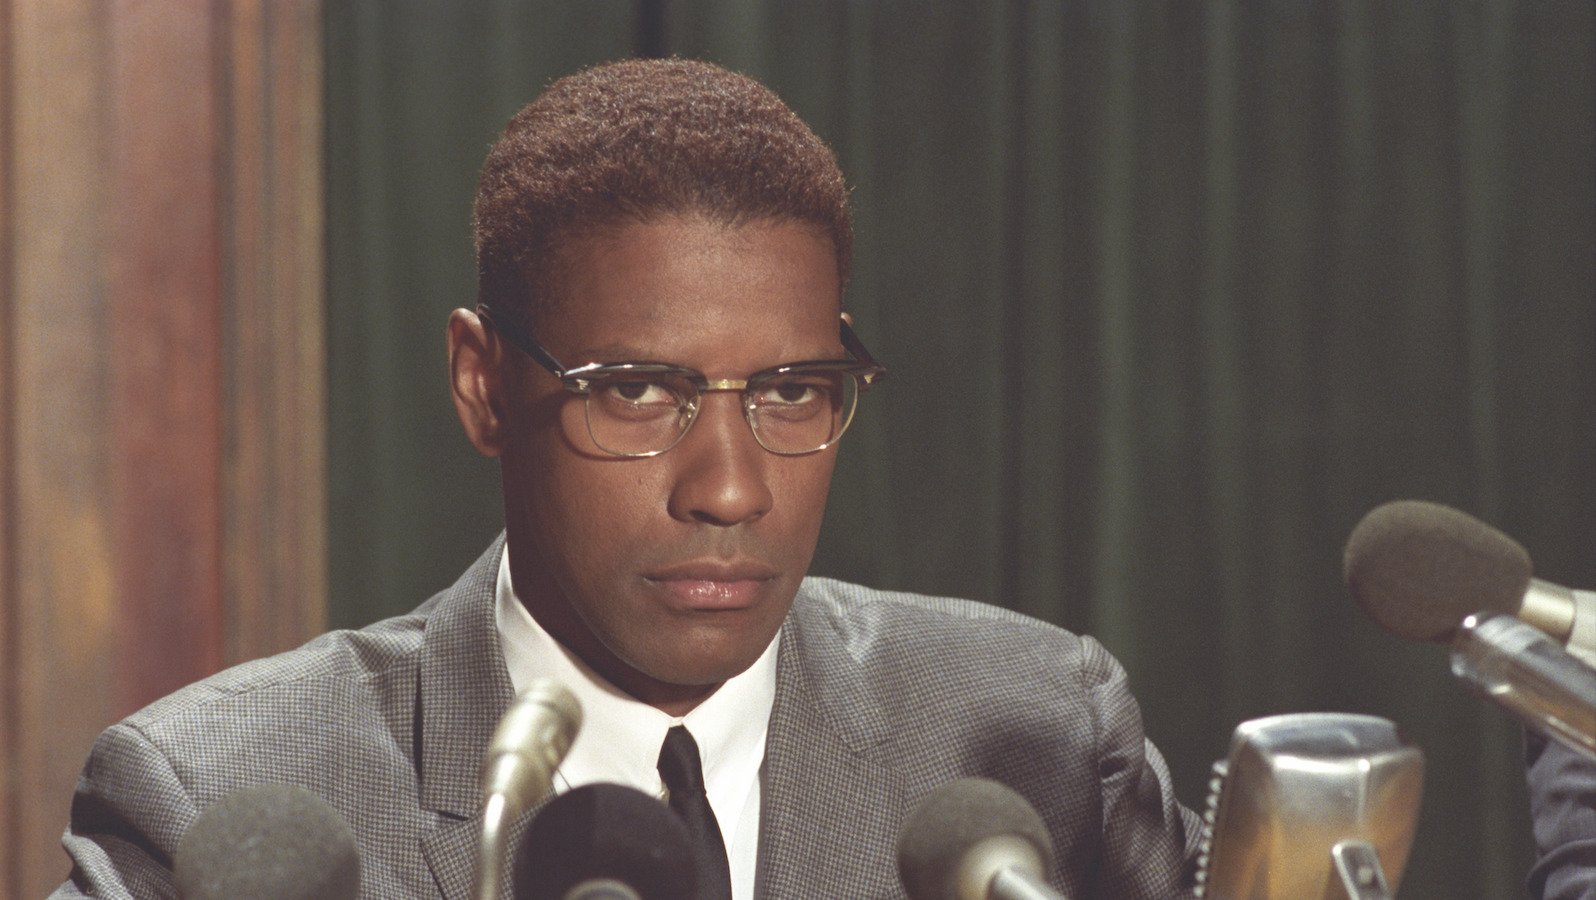 A man wearing spectacles and a serious expression sits in front of a bunch of press microphones